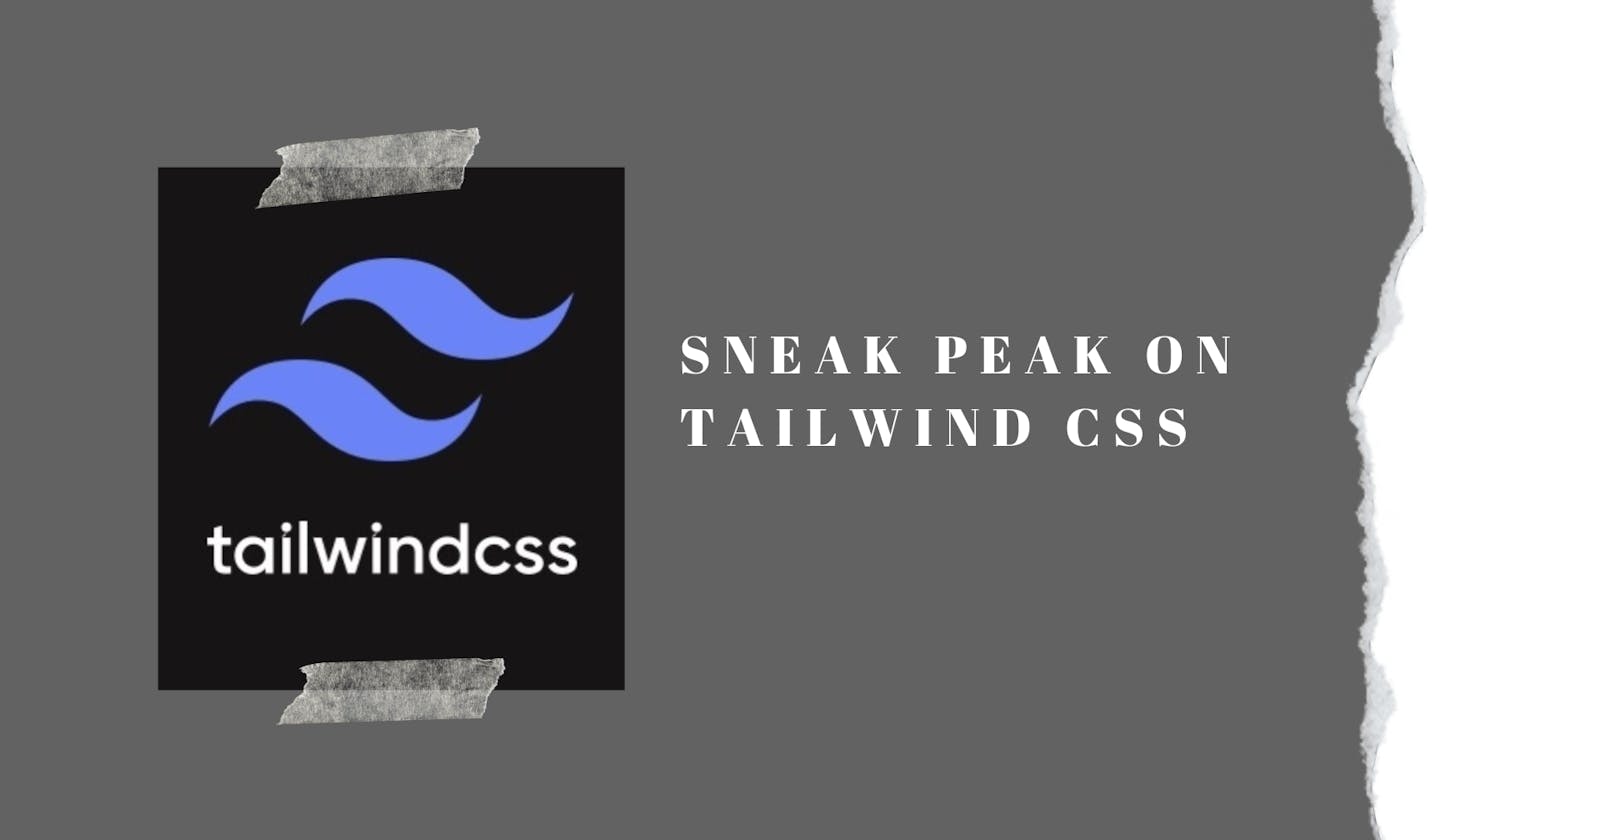 TAILWIND CSS - only for absolute beginners